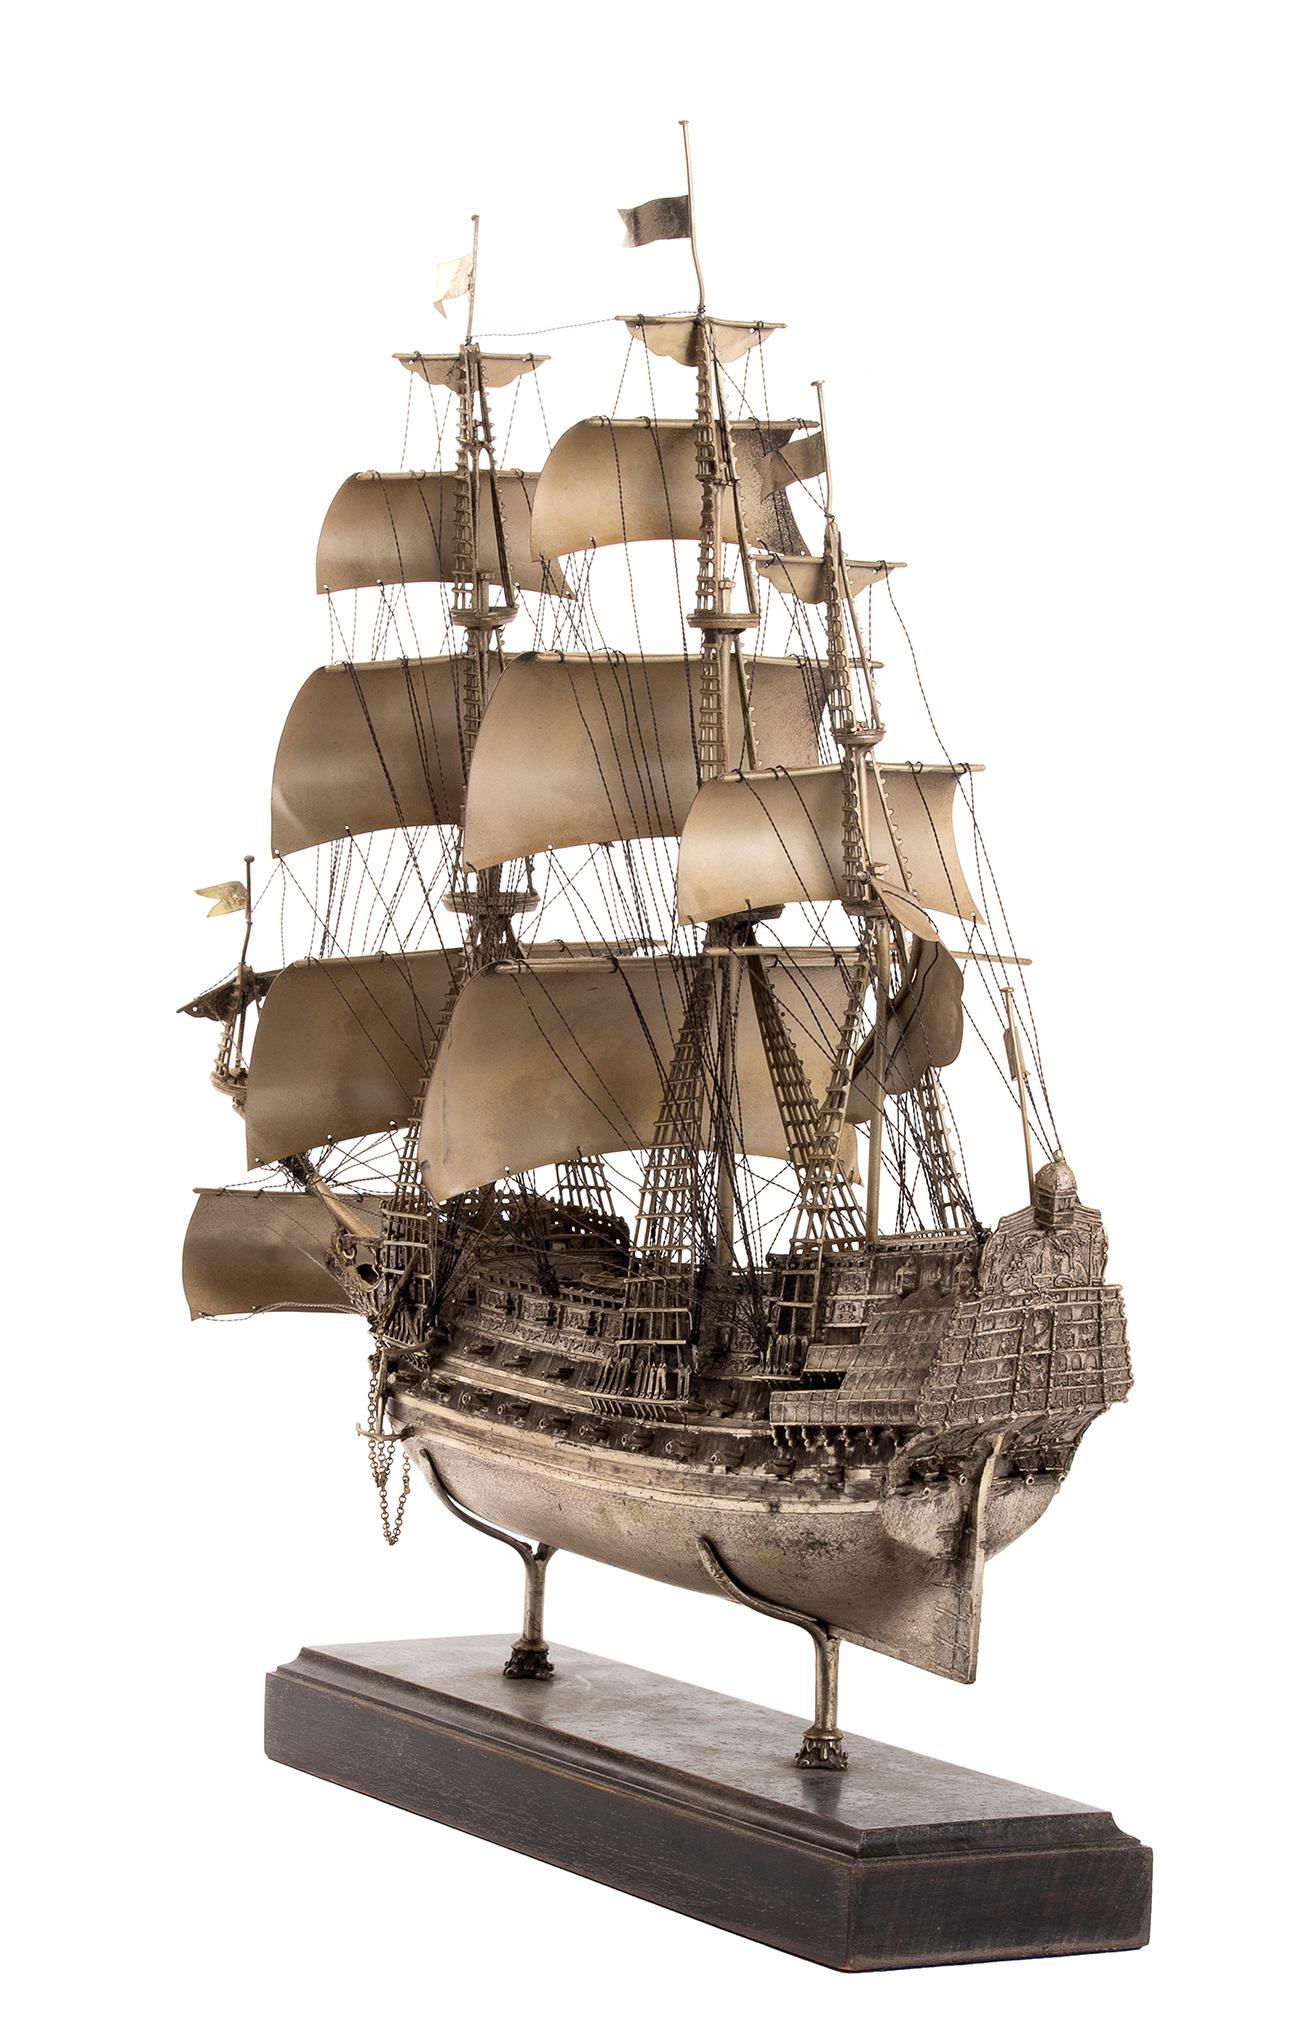 This is a beautiful model of sailing ship 